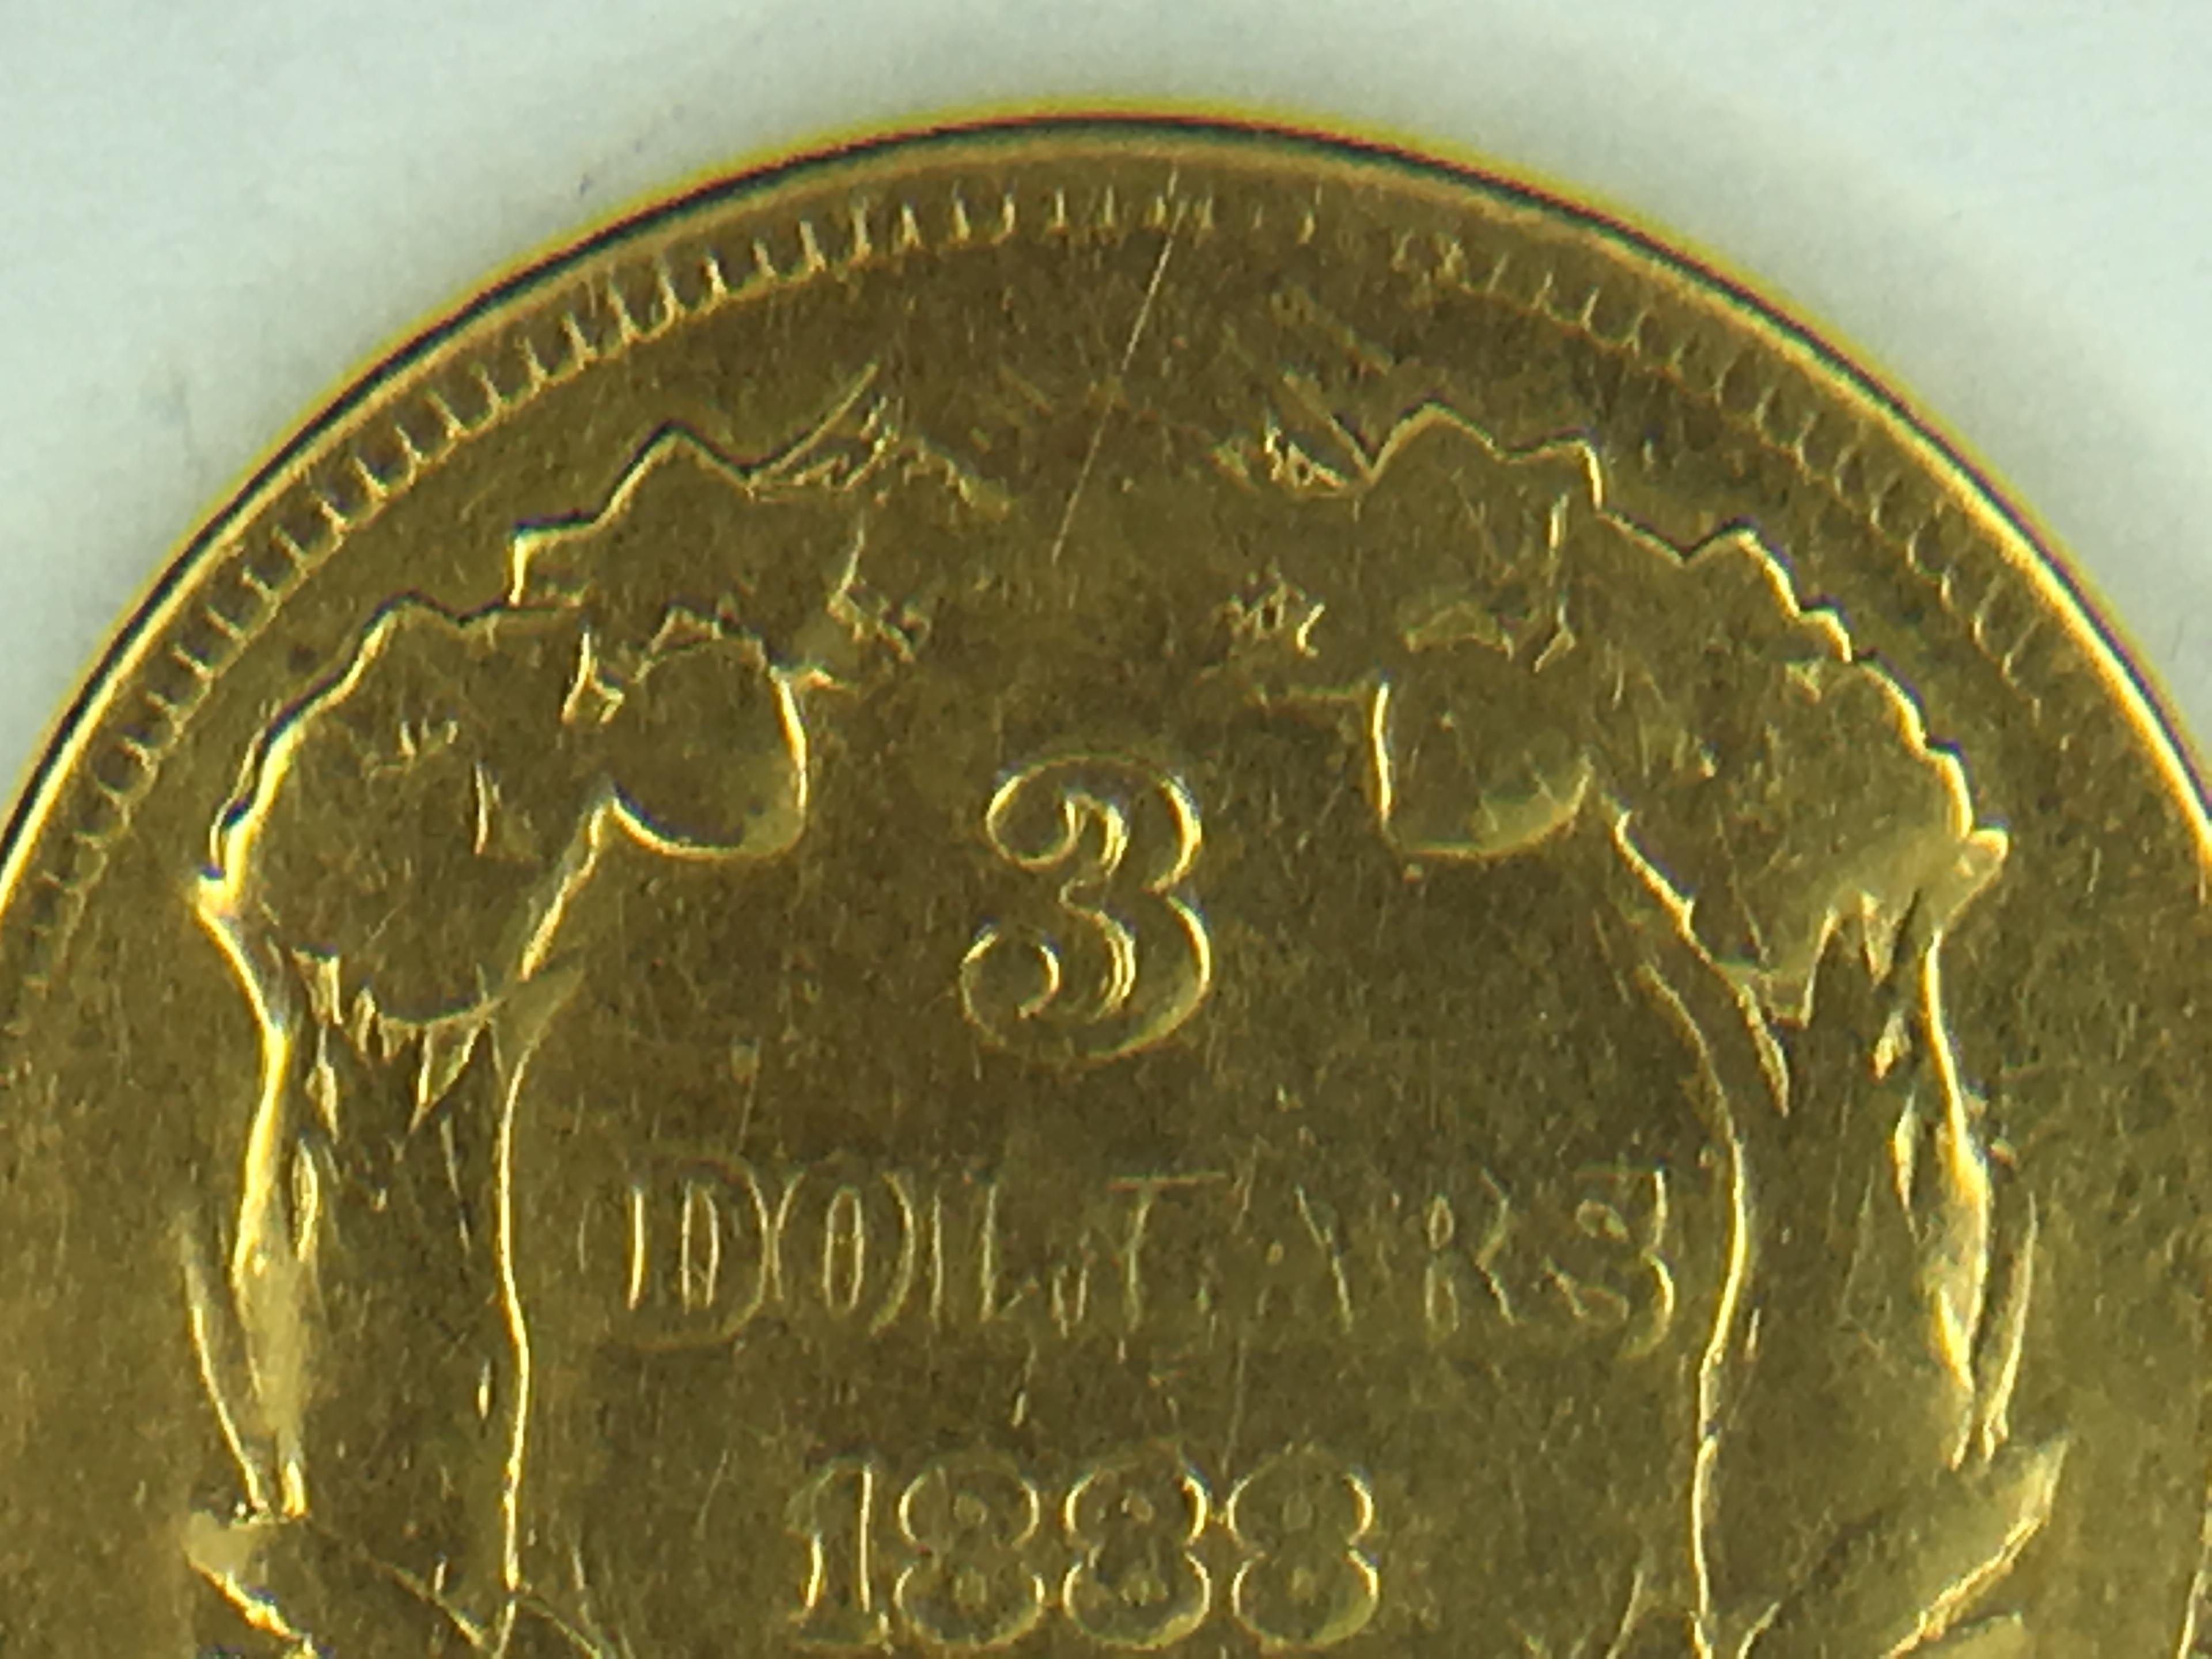 1888 United States $3.00 Gold Coin